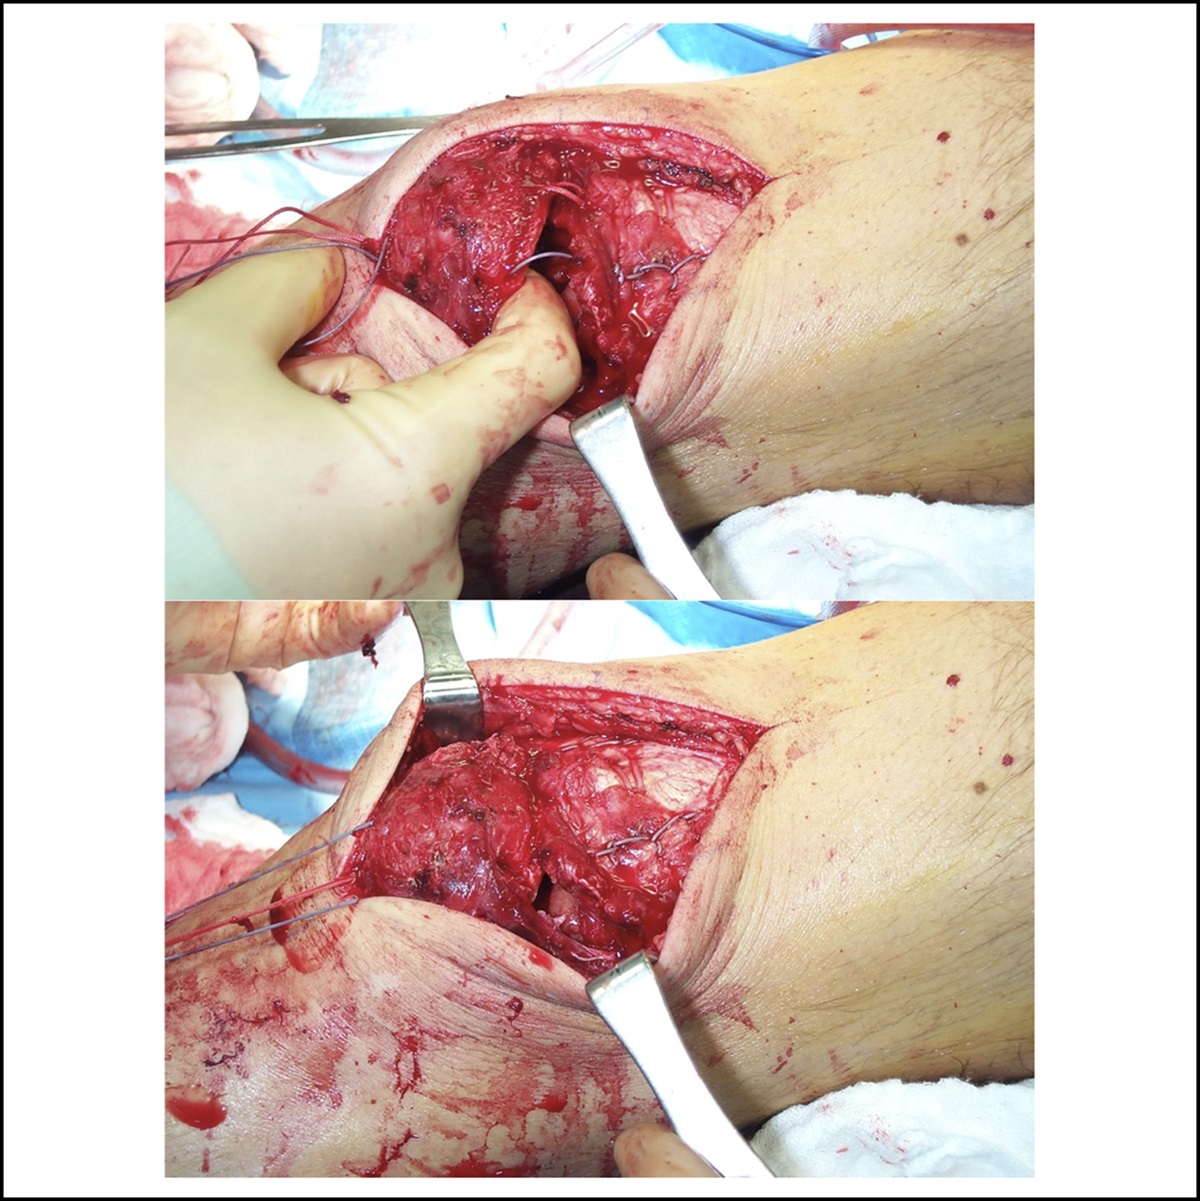 Simultaneous Bilateral Quadriceps Tendon Rupture Secondary to Parathyroid Carcinoma: A Case Report